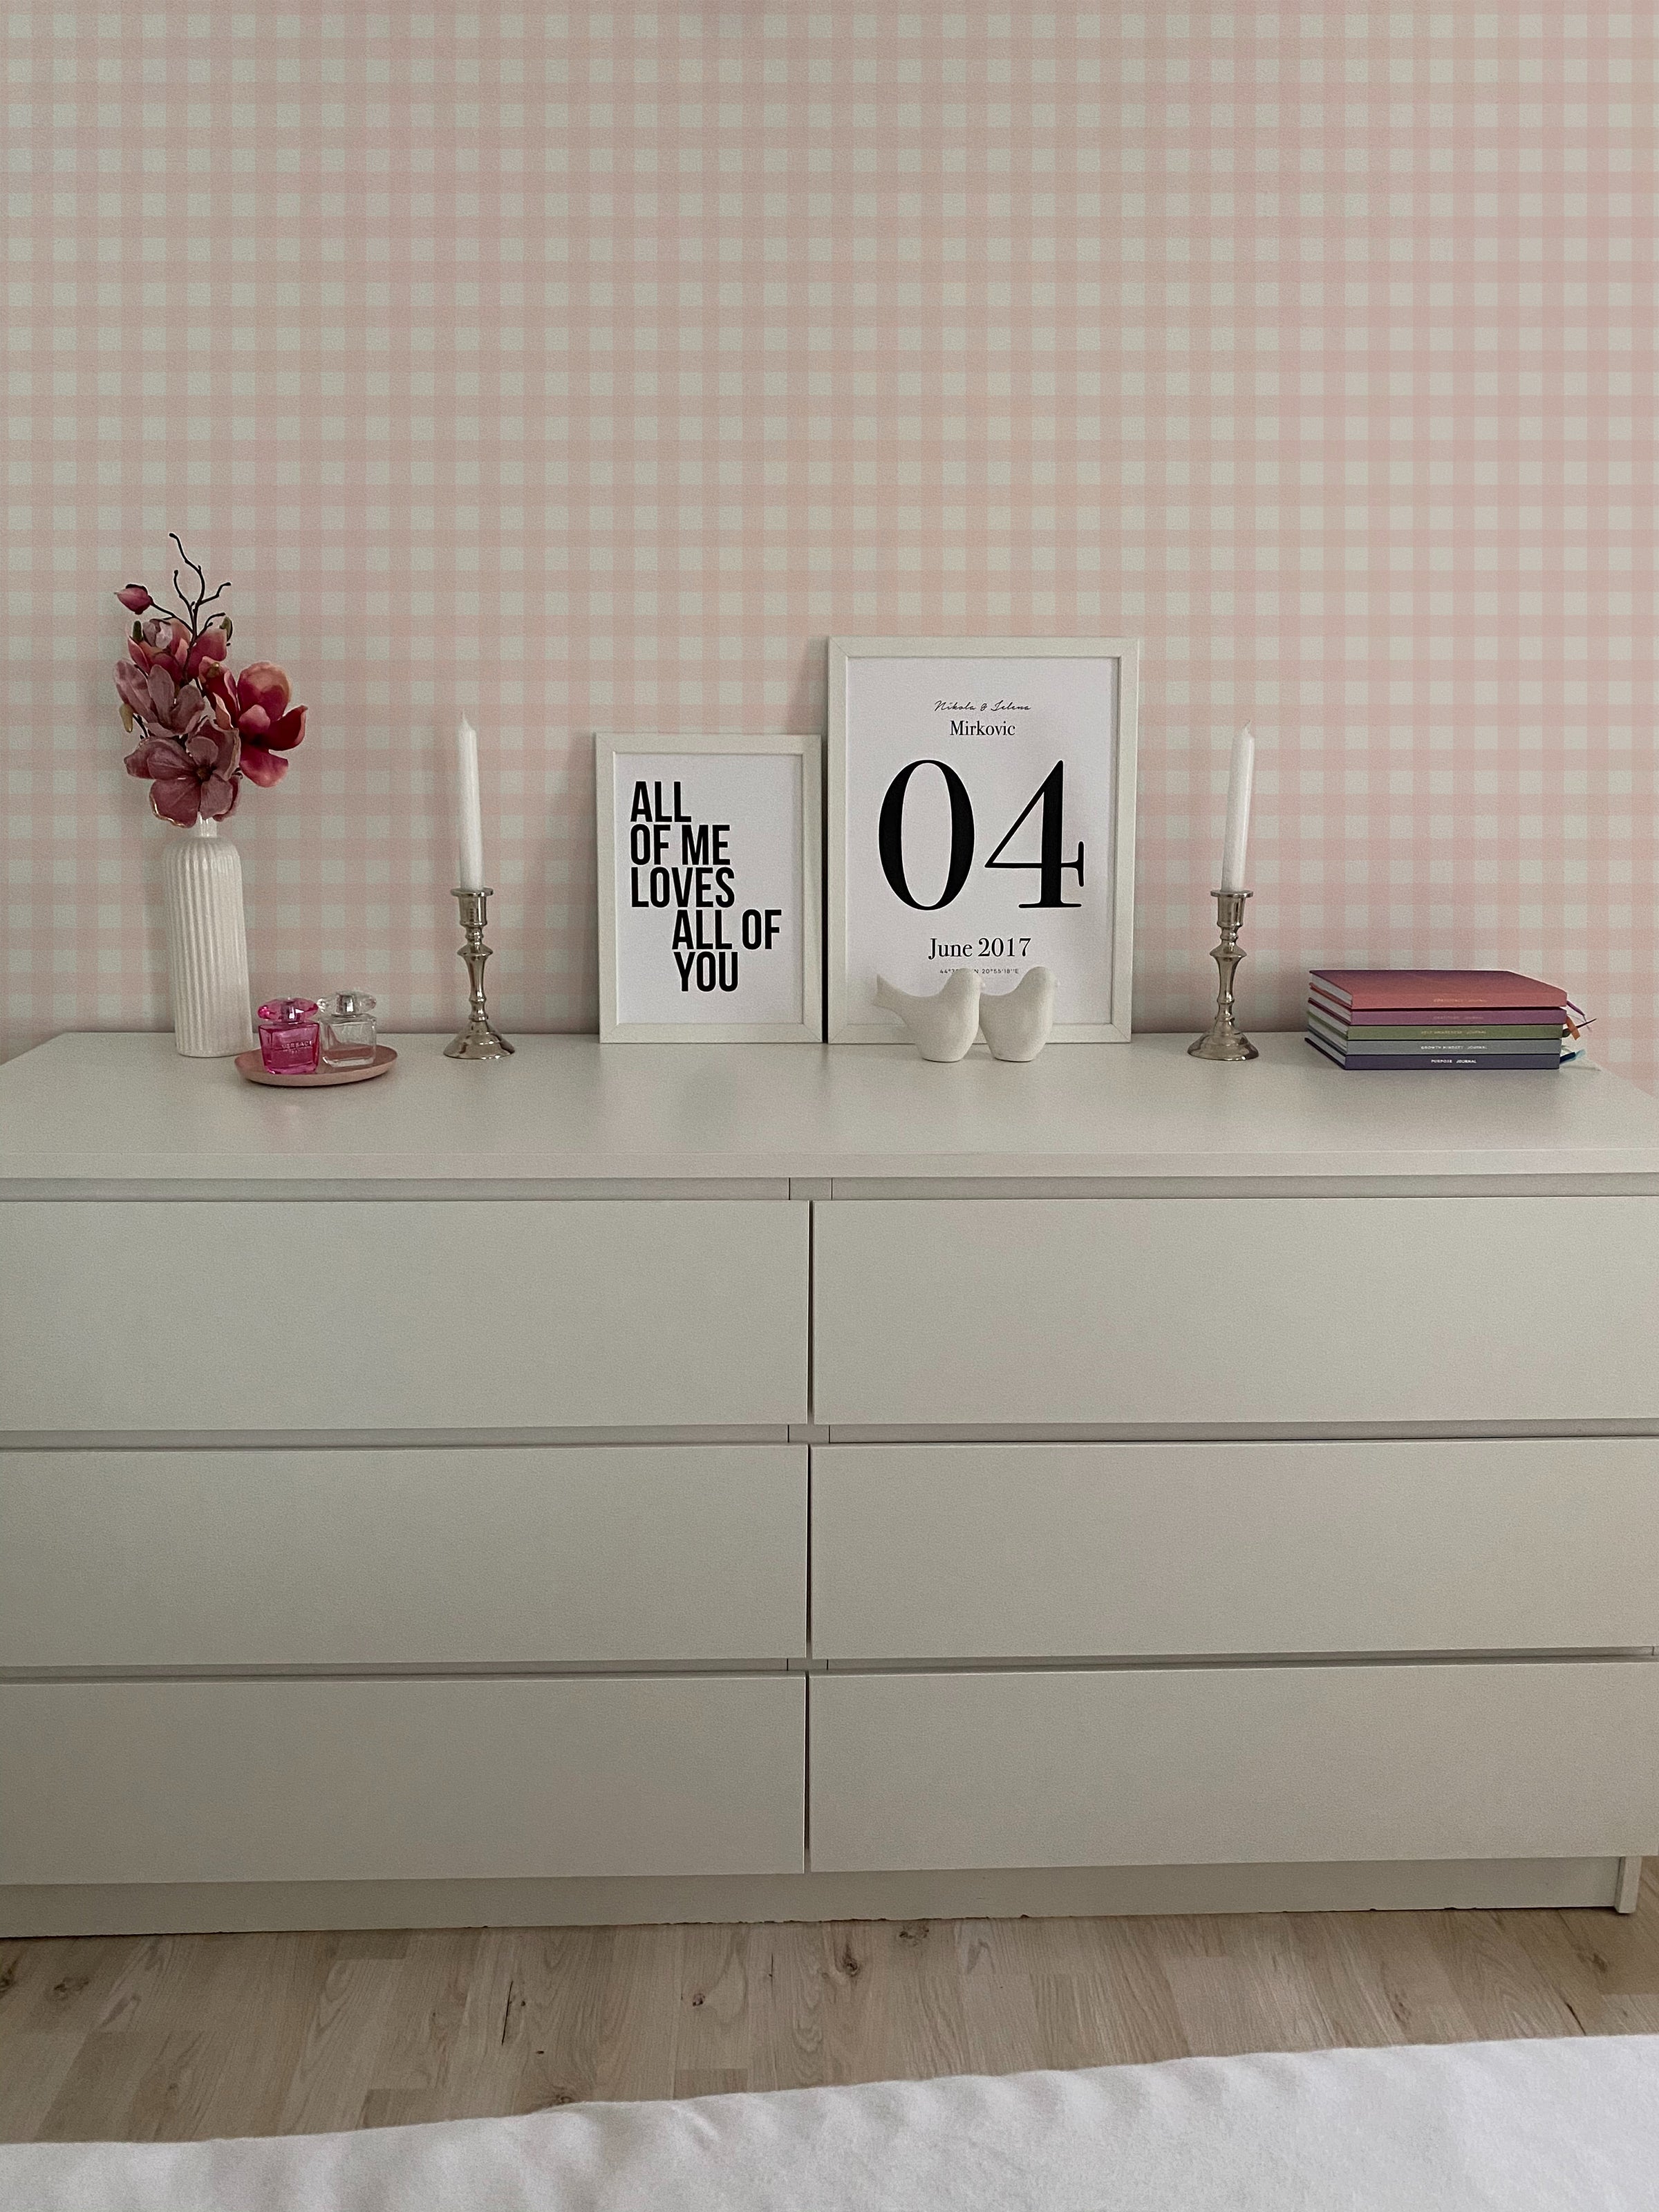 A stylish dresser setup against a wall covered with Gingham Wallpaper in a soft pink and white checkered pattern. Decorative items on the dresser include framed quotes, candles, a stack of books, and a pink flower arrangement